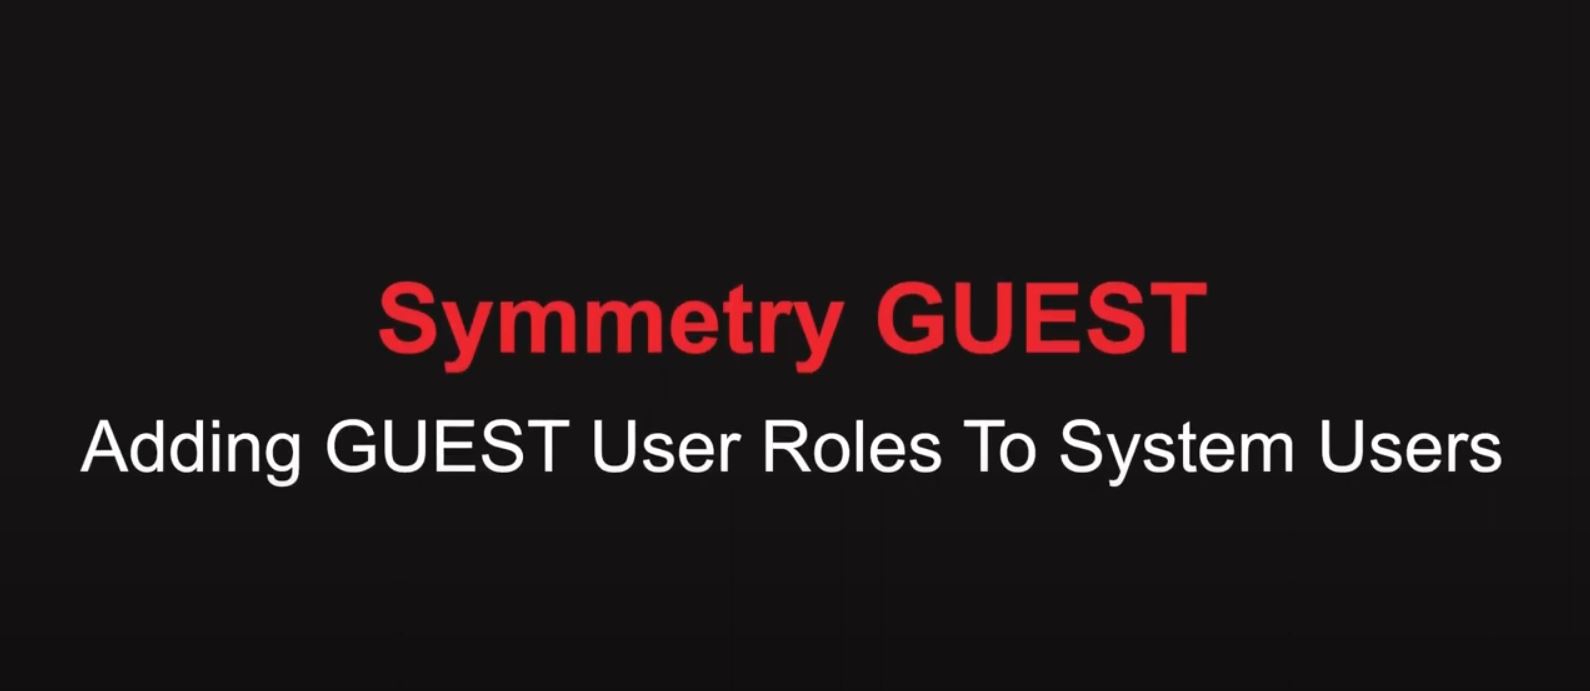 AMAG Technology Symmetry GUEST – Adding User Roles to System Users